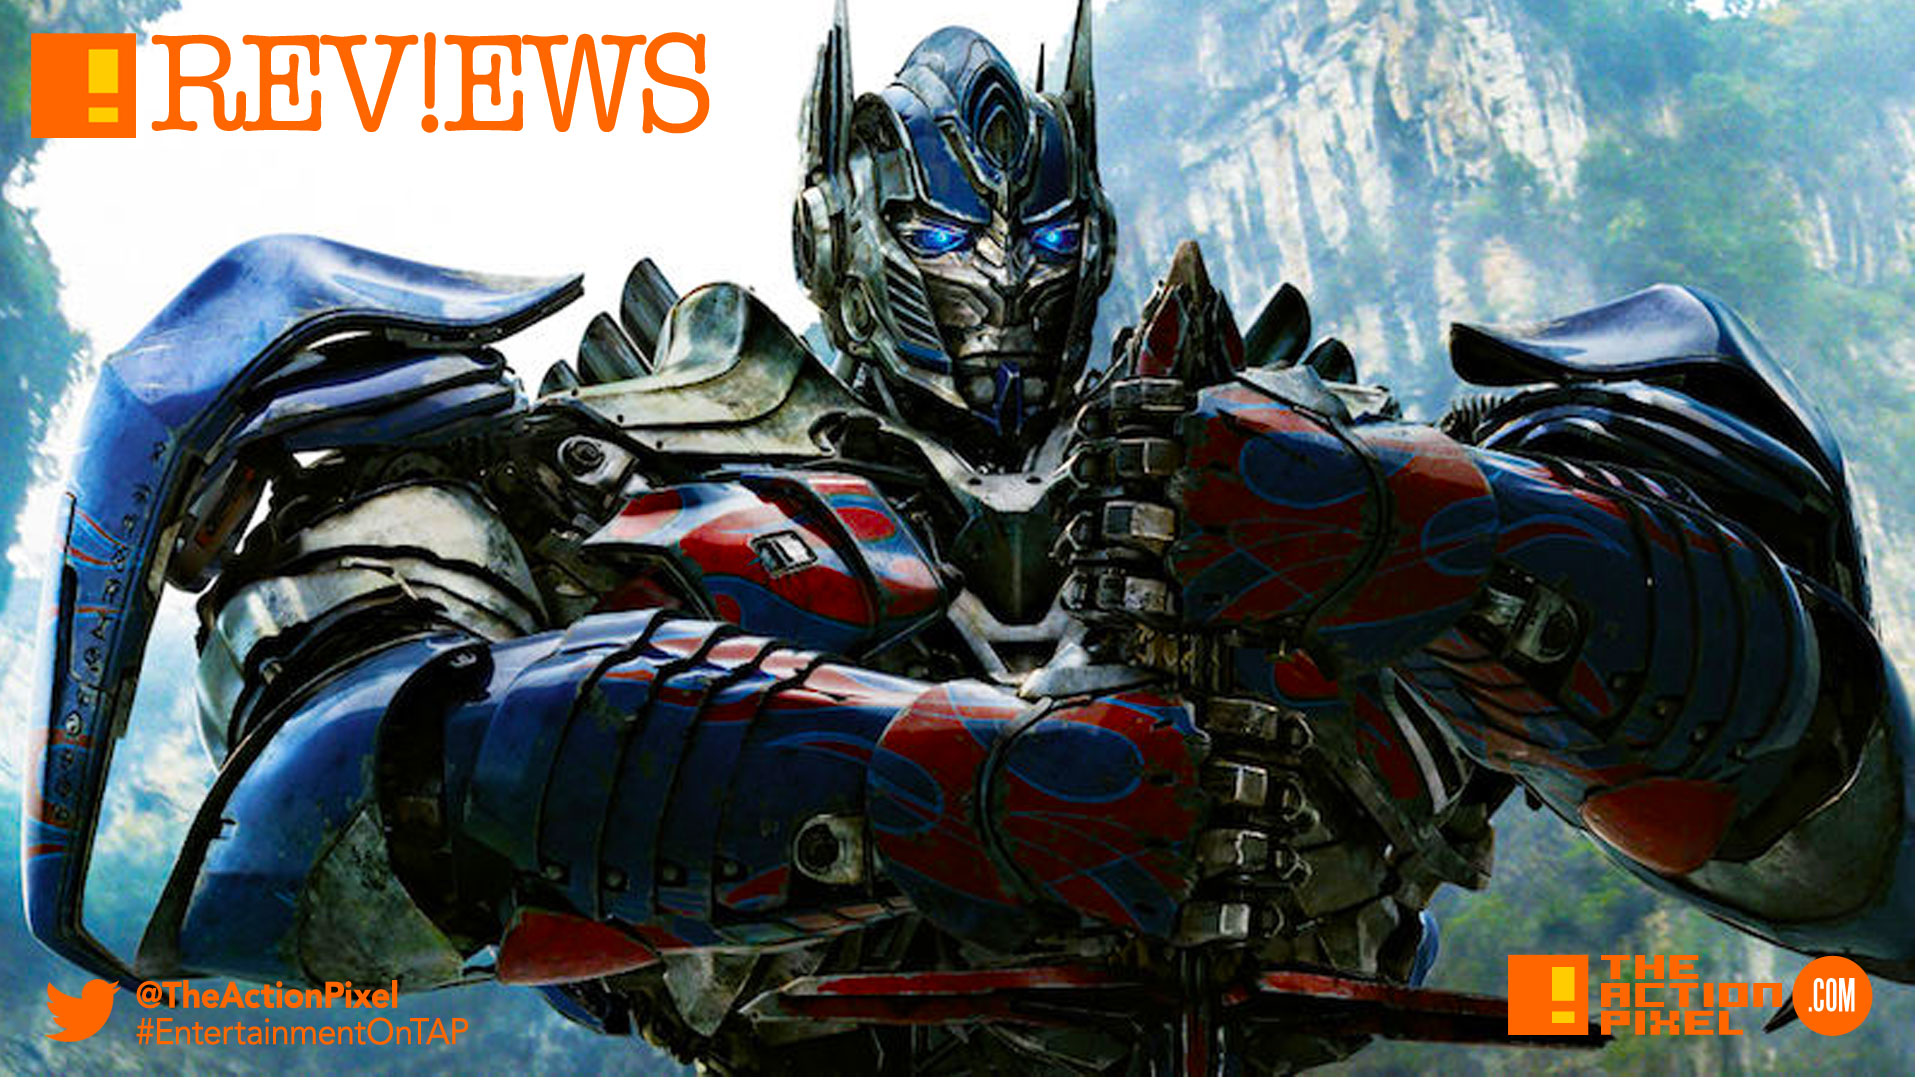 tap reviews,transformers 5, optimus prime, transformers, the last knight, transformers, poster, the last knight, paramount pictures, michael bay, entertainment on tap, the action pixel, movie review, film review, paramount pictures, michael bay, anthony hopkins,